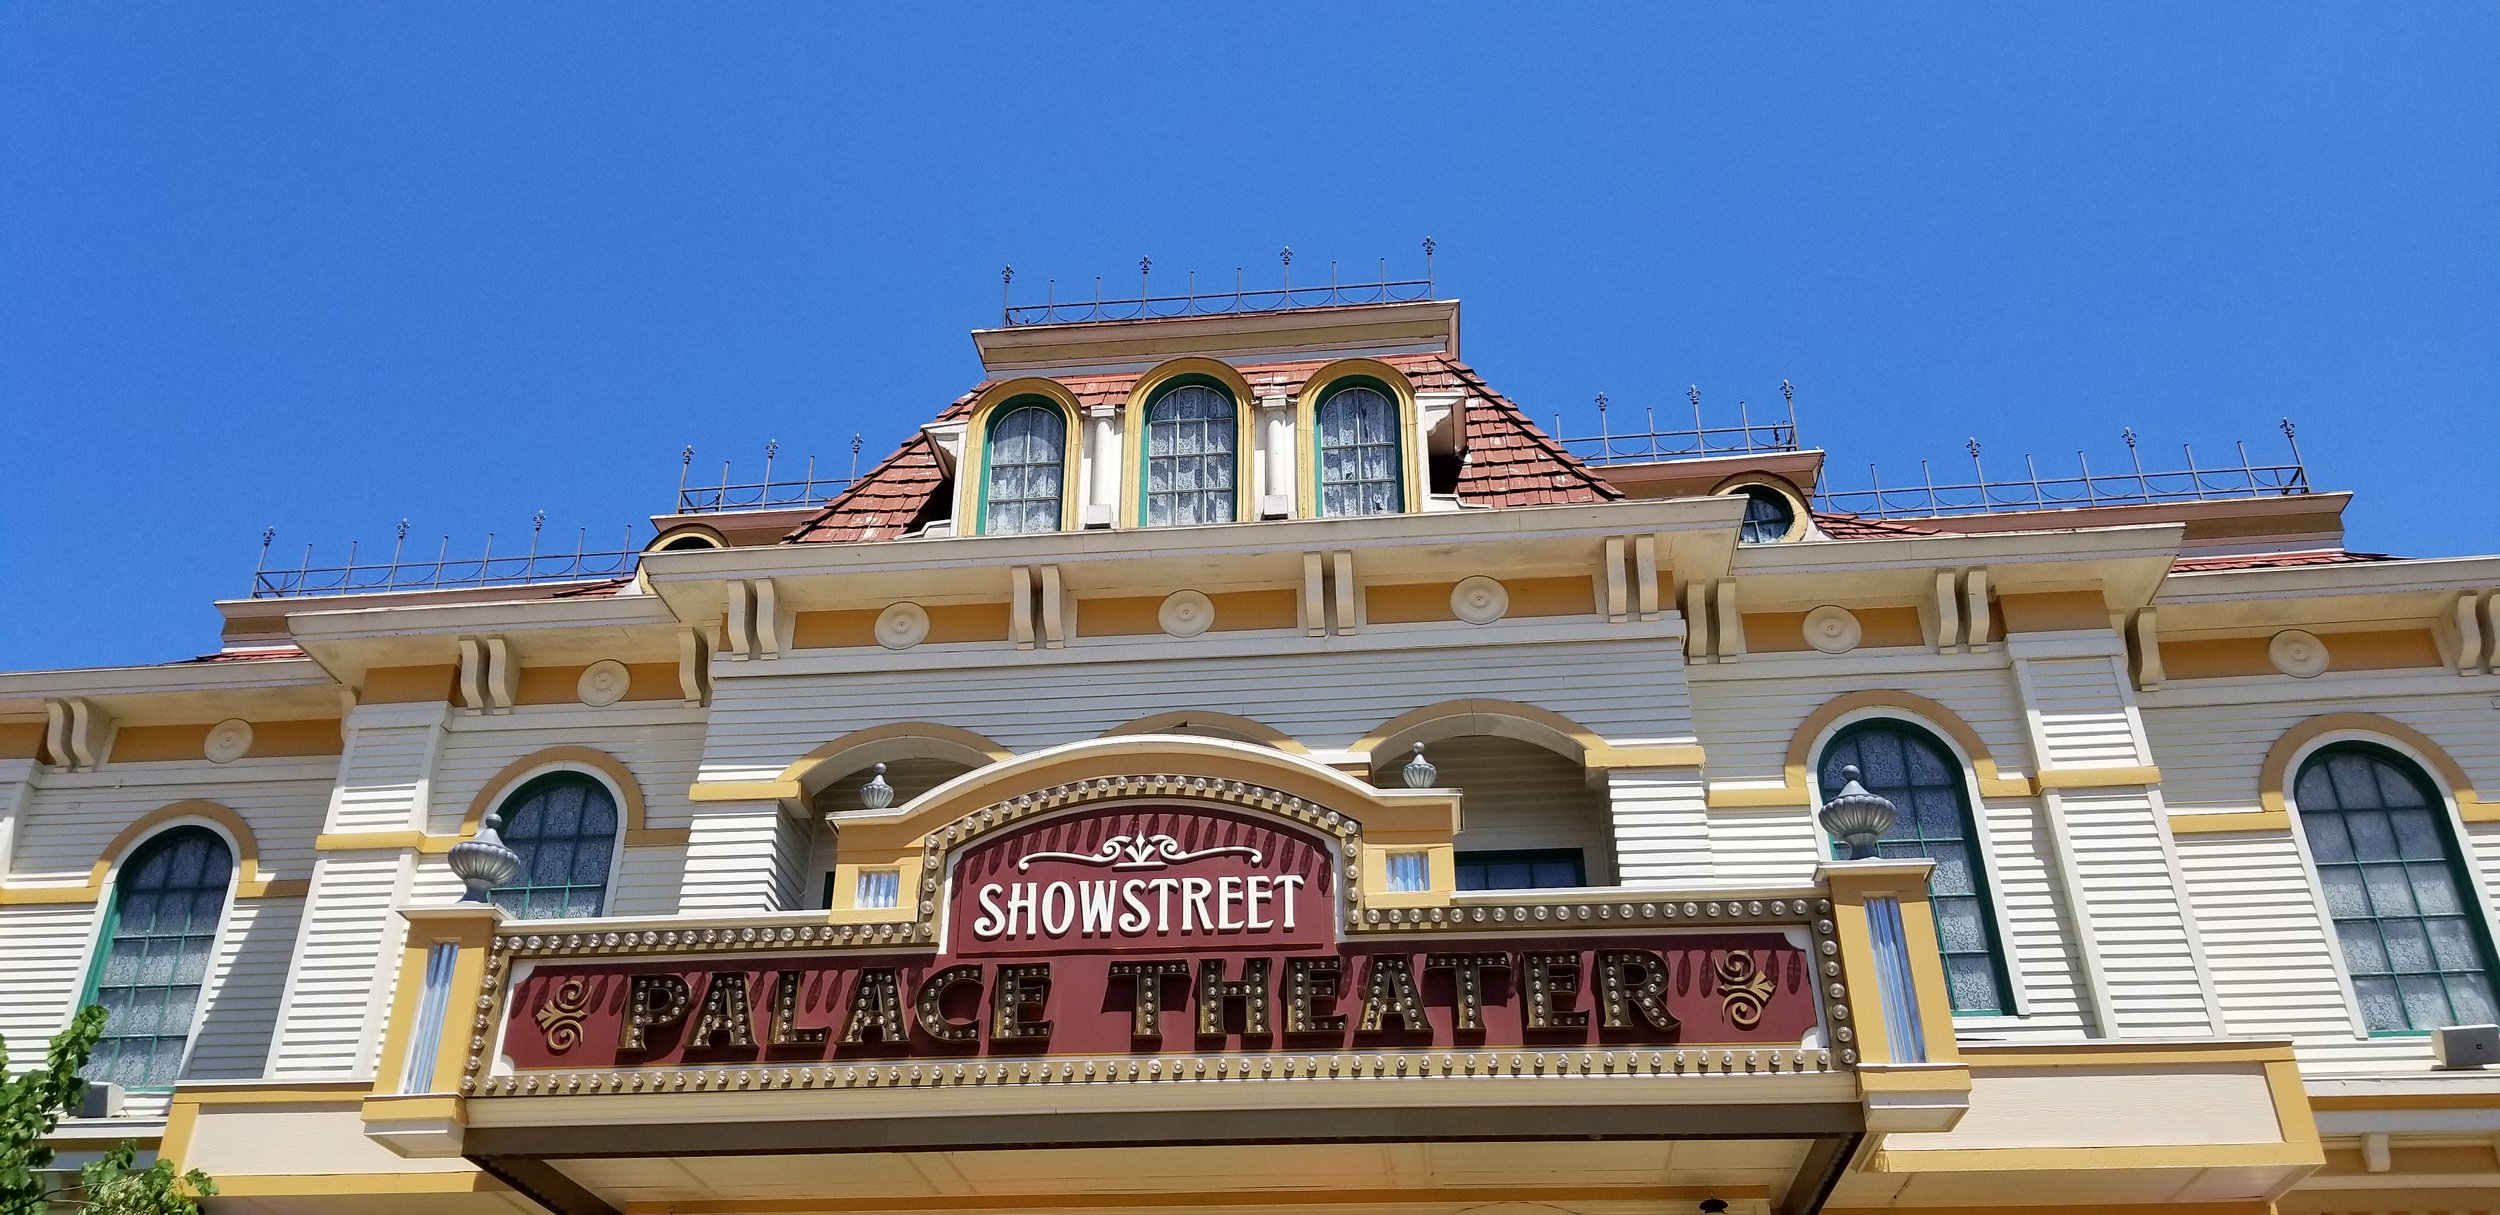  Dollywood’s Showstreet Palace Theater is the home of the Kingdom Heirs, a Southern Gospel group that’s been a part of the park for years.  